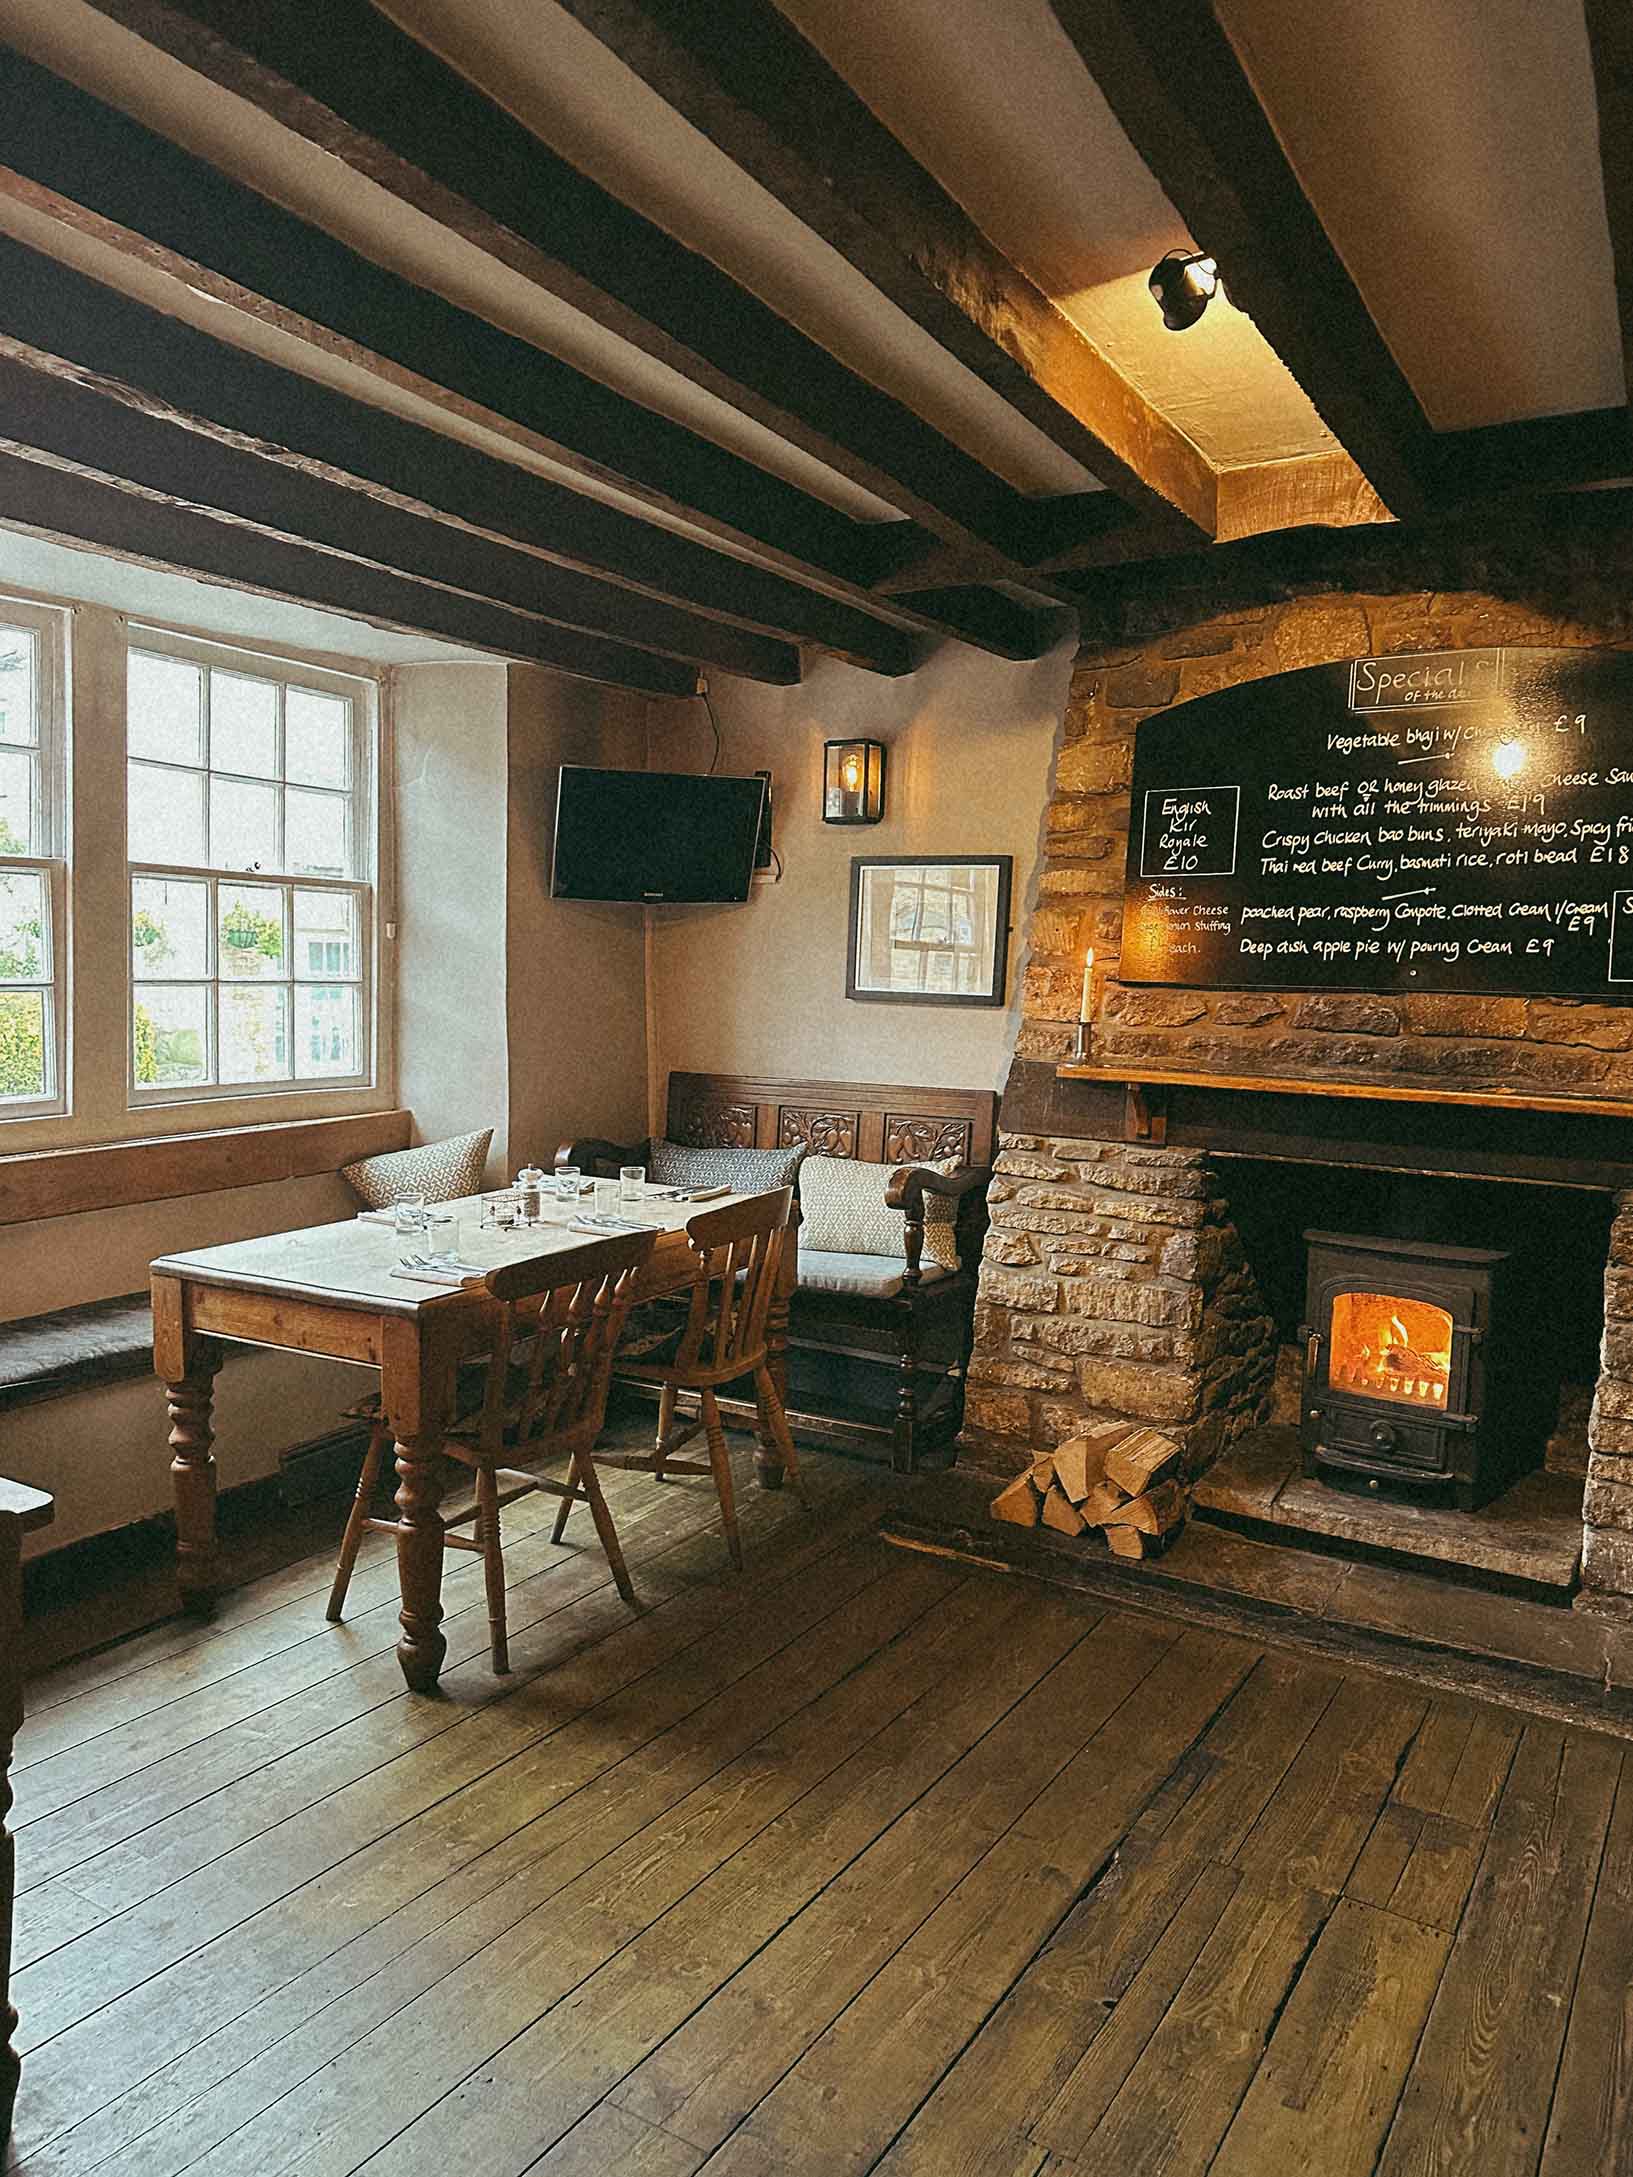 Inside the rustic, cosy interiors of The Angel pub